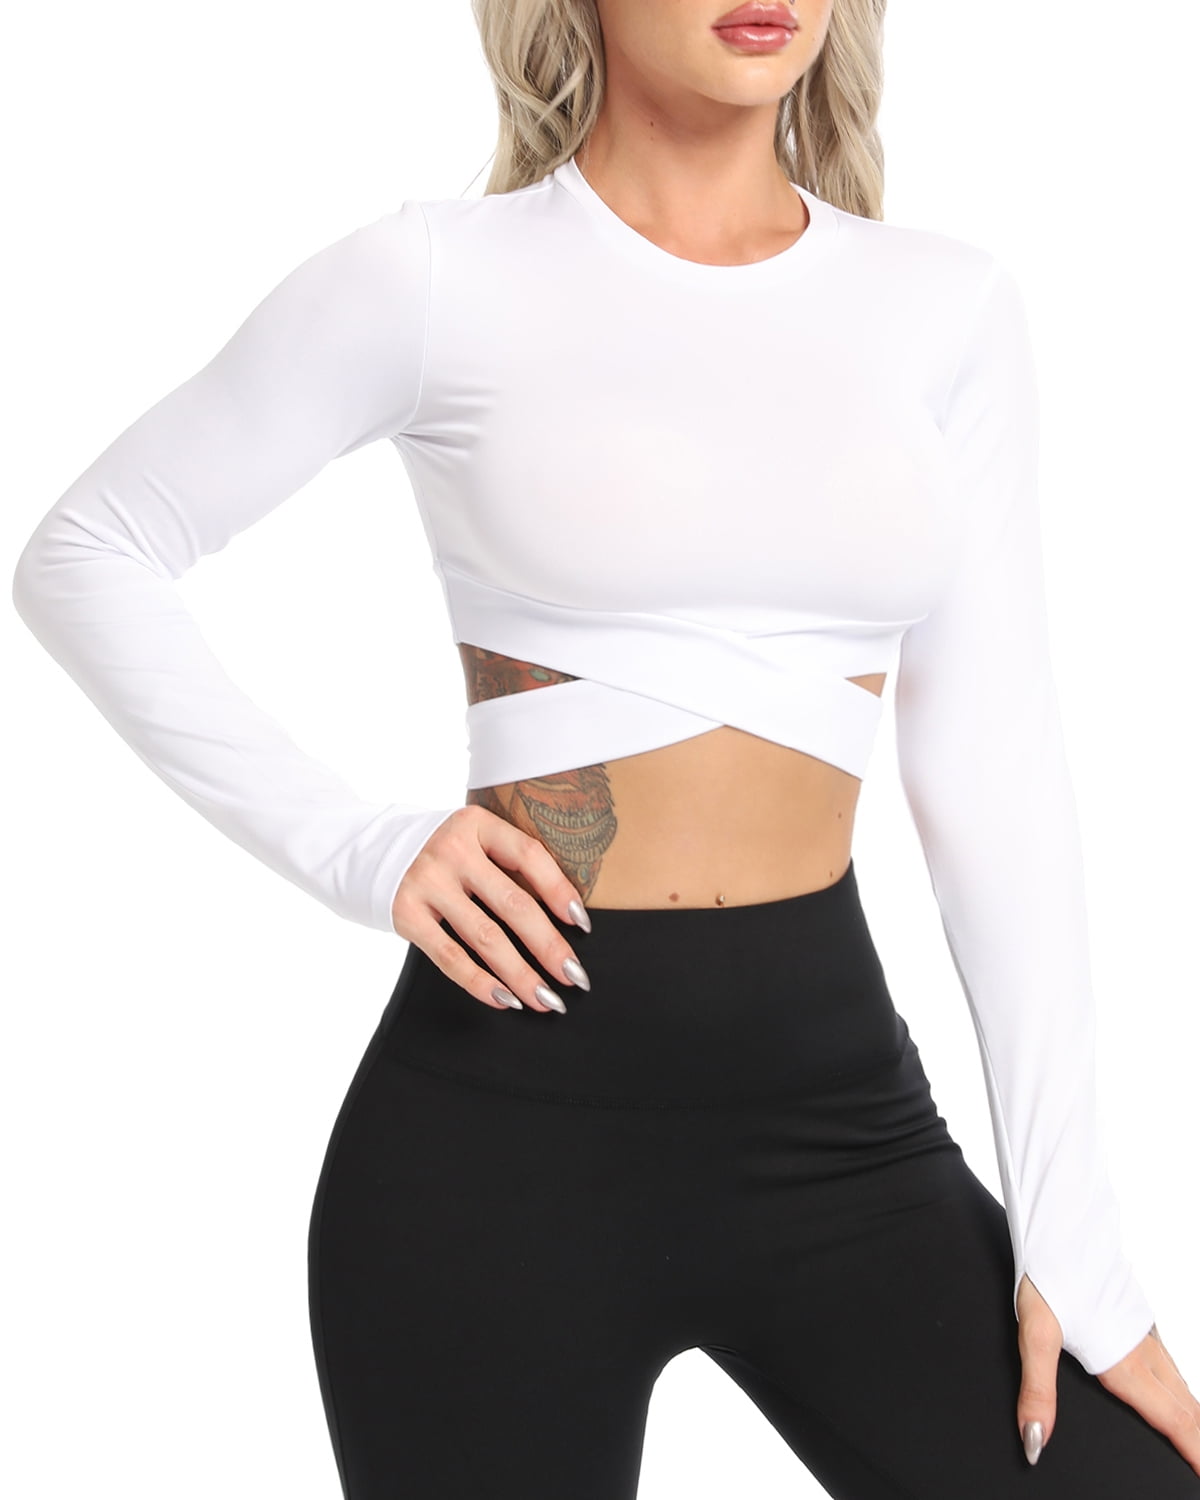 CRZ YOGA Long Sleeve Crop Tops for Women Round Neck Workout Shirts with Thumbholes Athletic Yoga Cropped Top